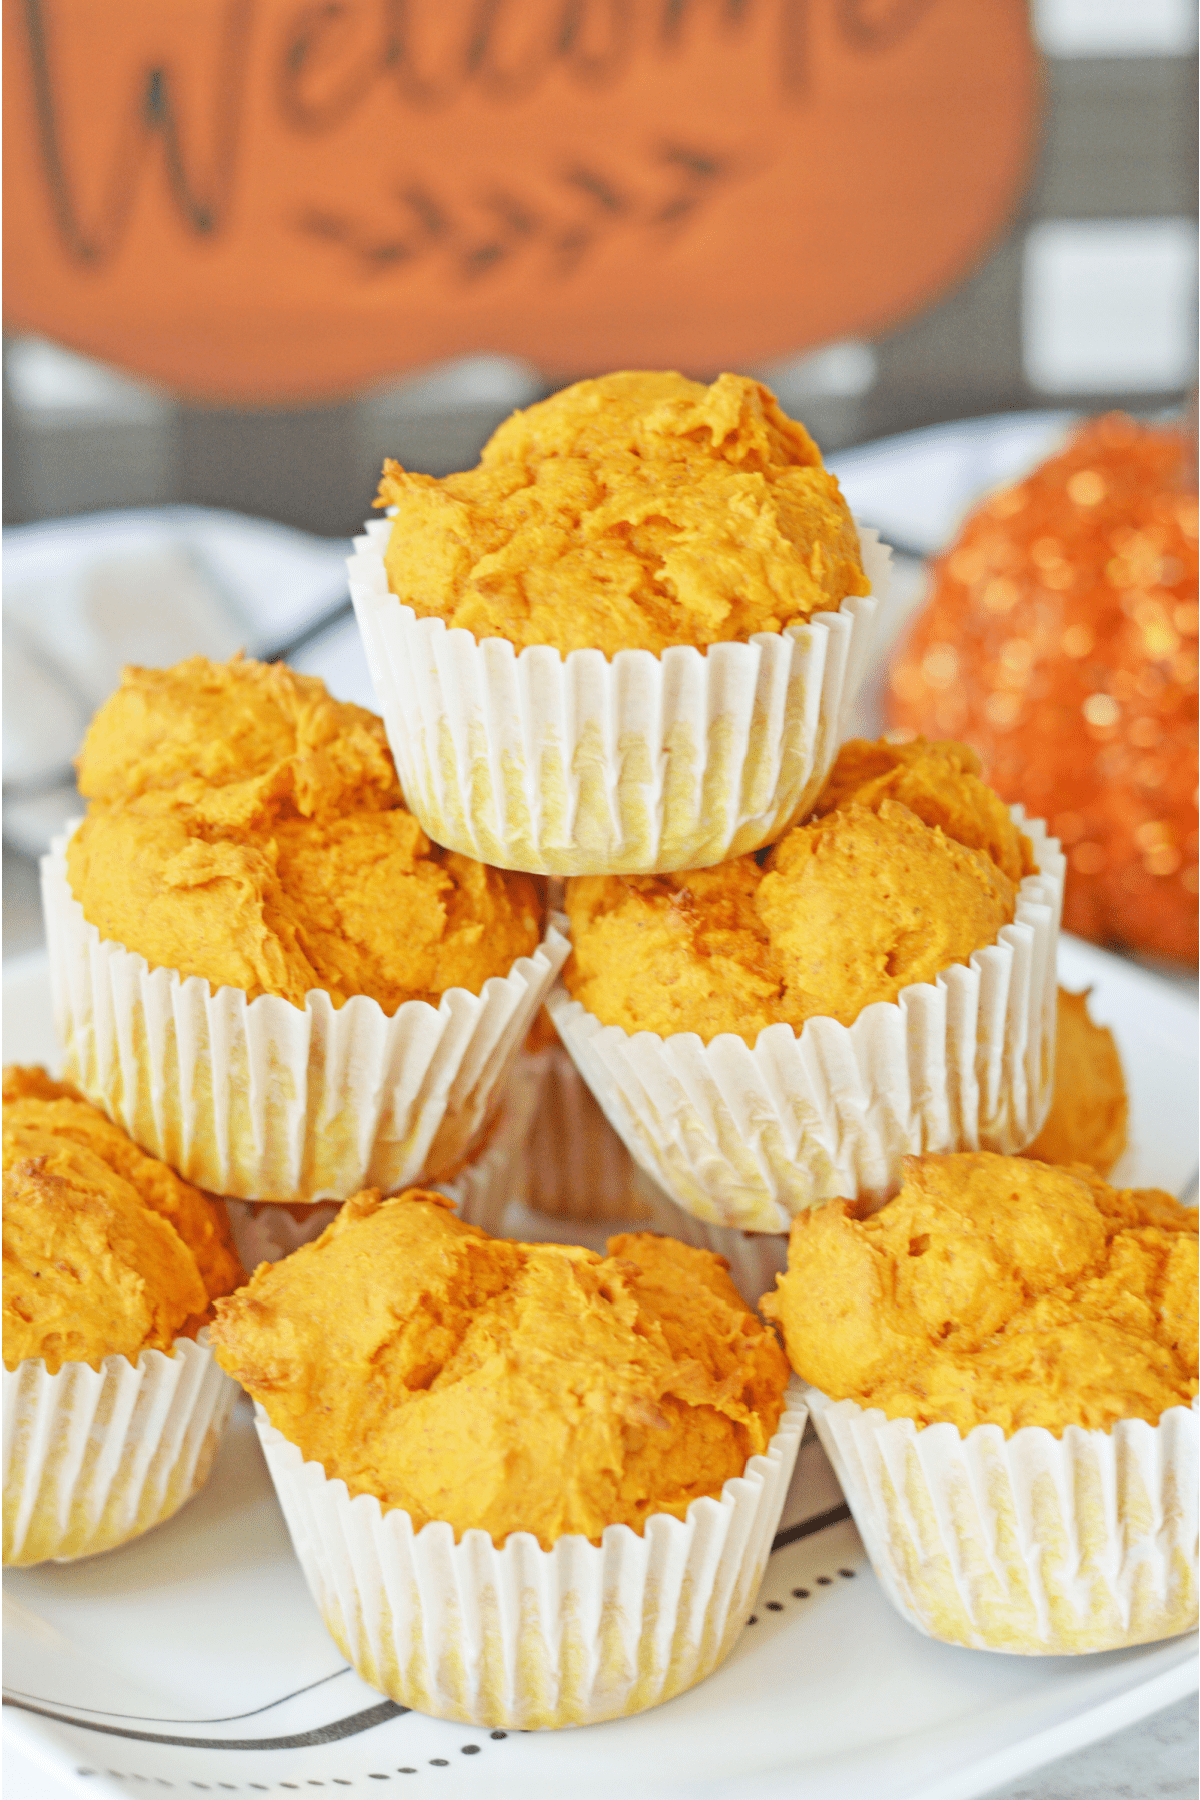 Pumpkin muffins stacked on plate